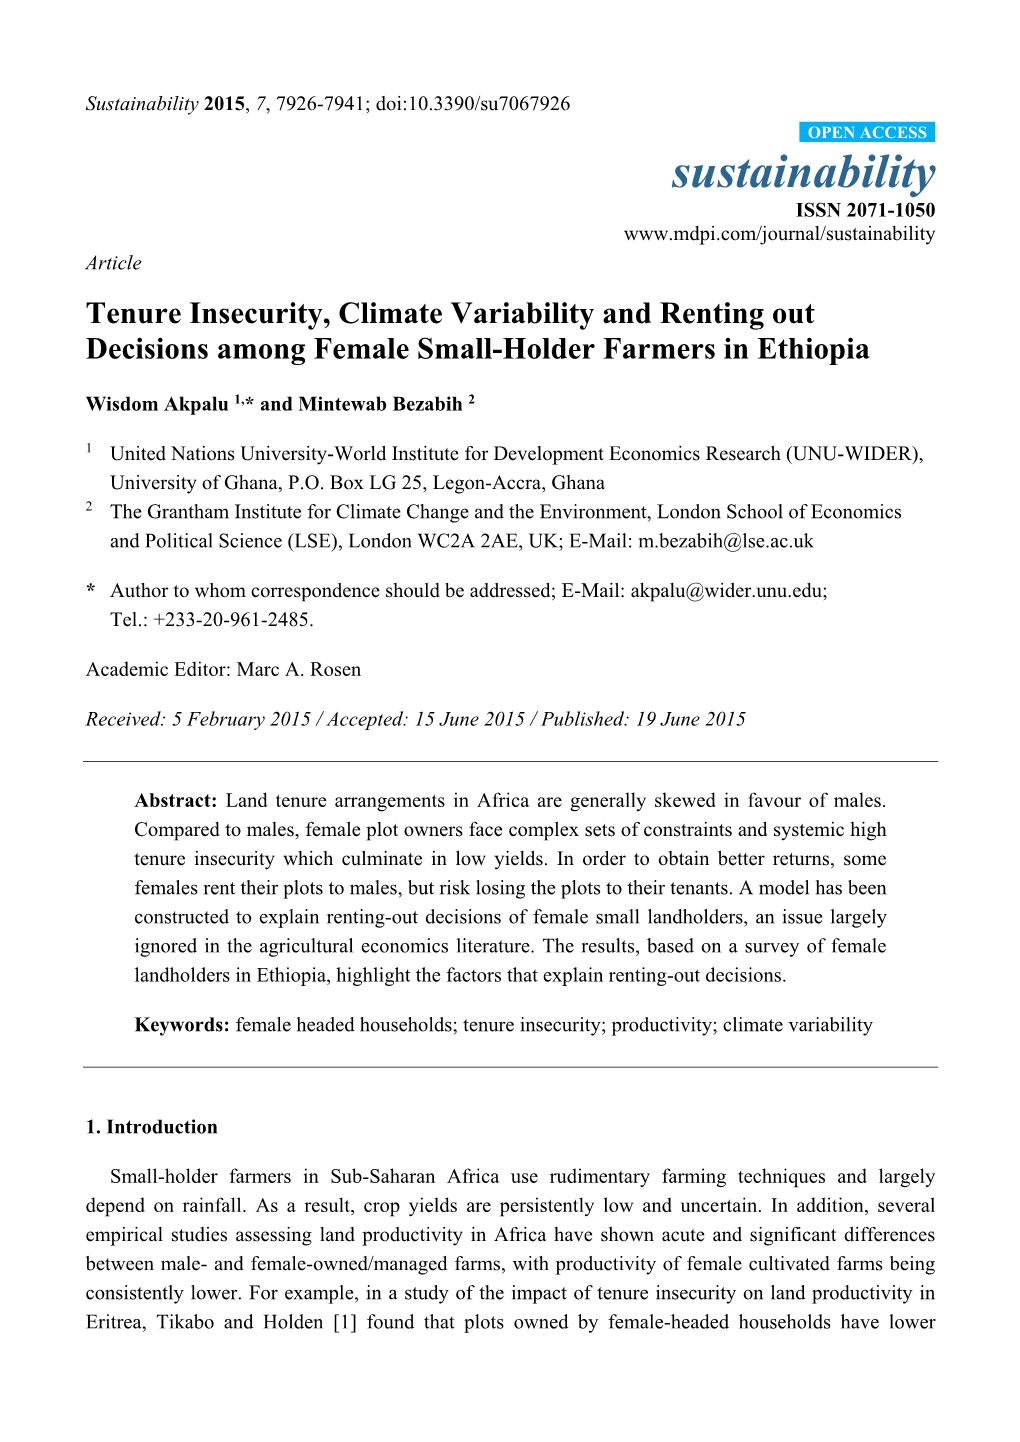 Tenure Insecurity, Climate Variability and Renting out Decisions Among Female Small-Holder Farmers in Ethiopia